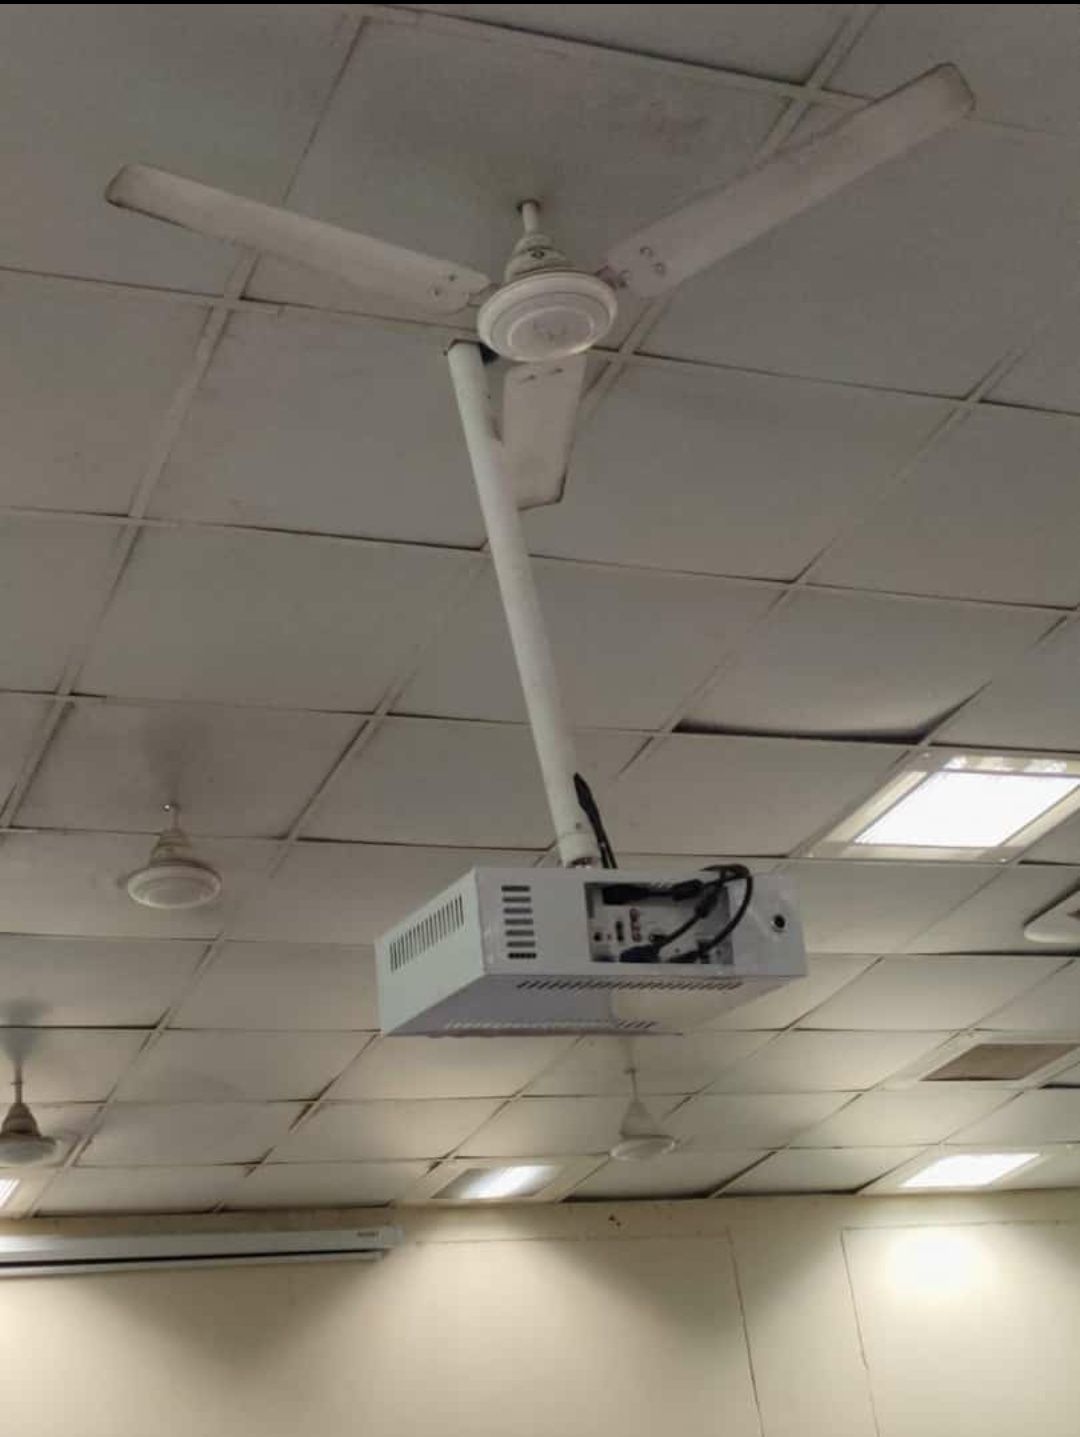 I'm studying in an engineering college. This is the ceiling of our classroom.